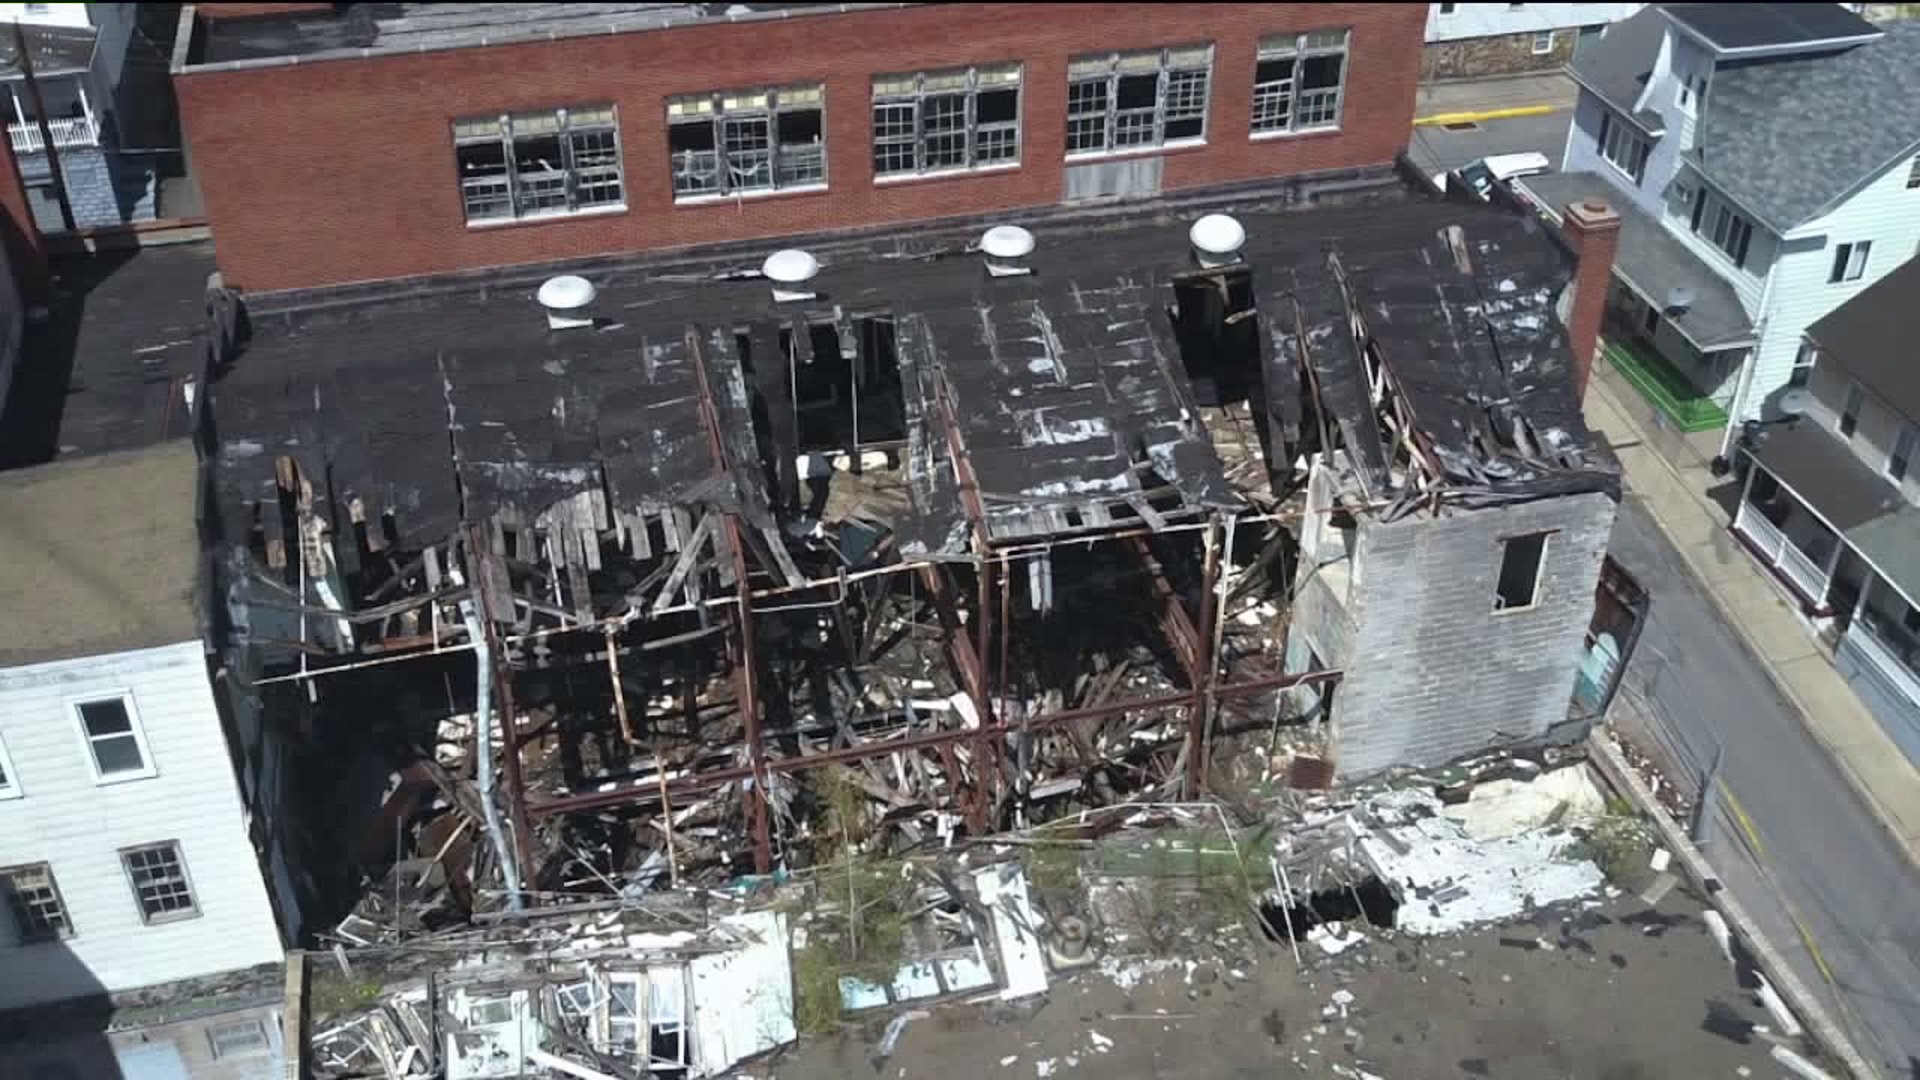 Crumbling Former Dress Factory Set to be Demolished